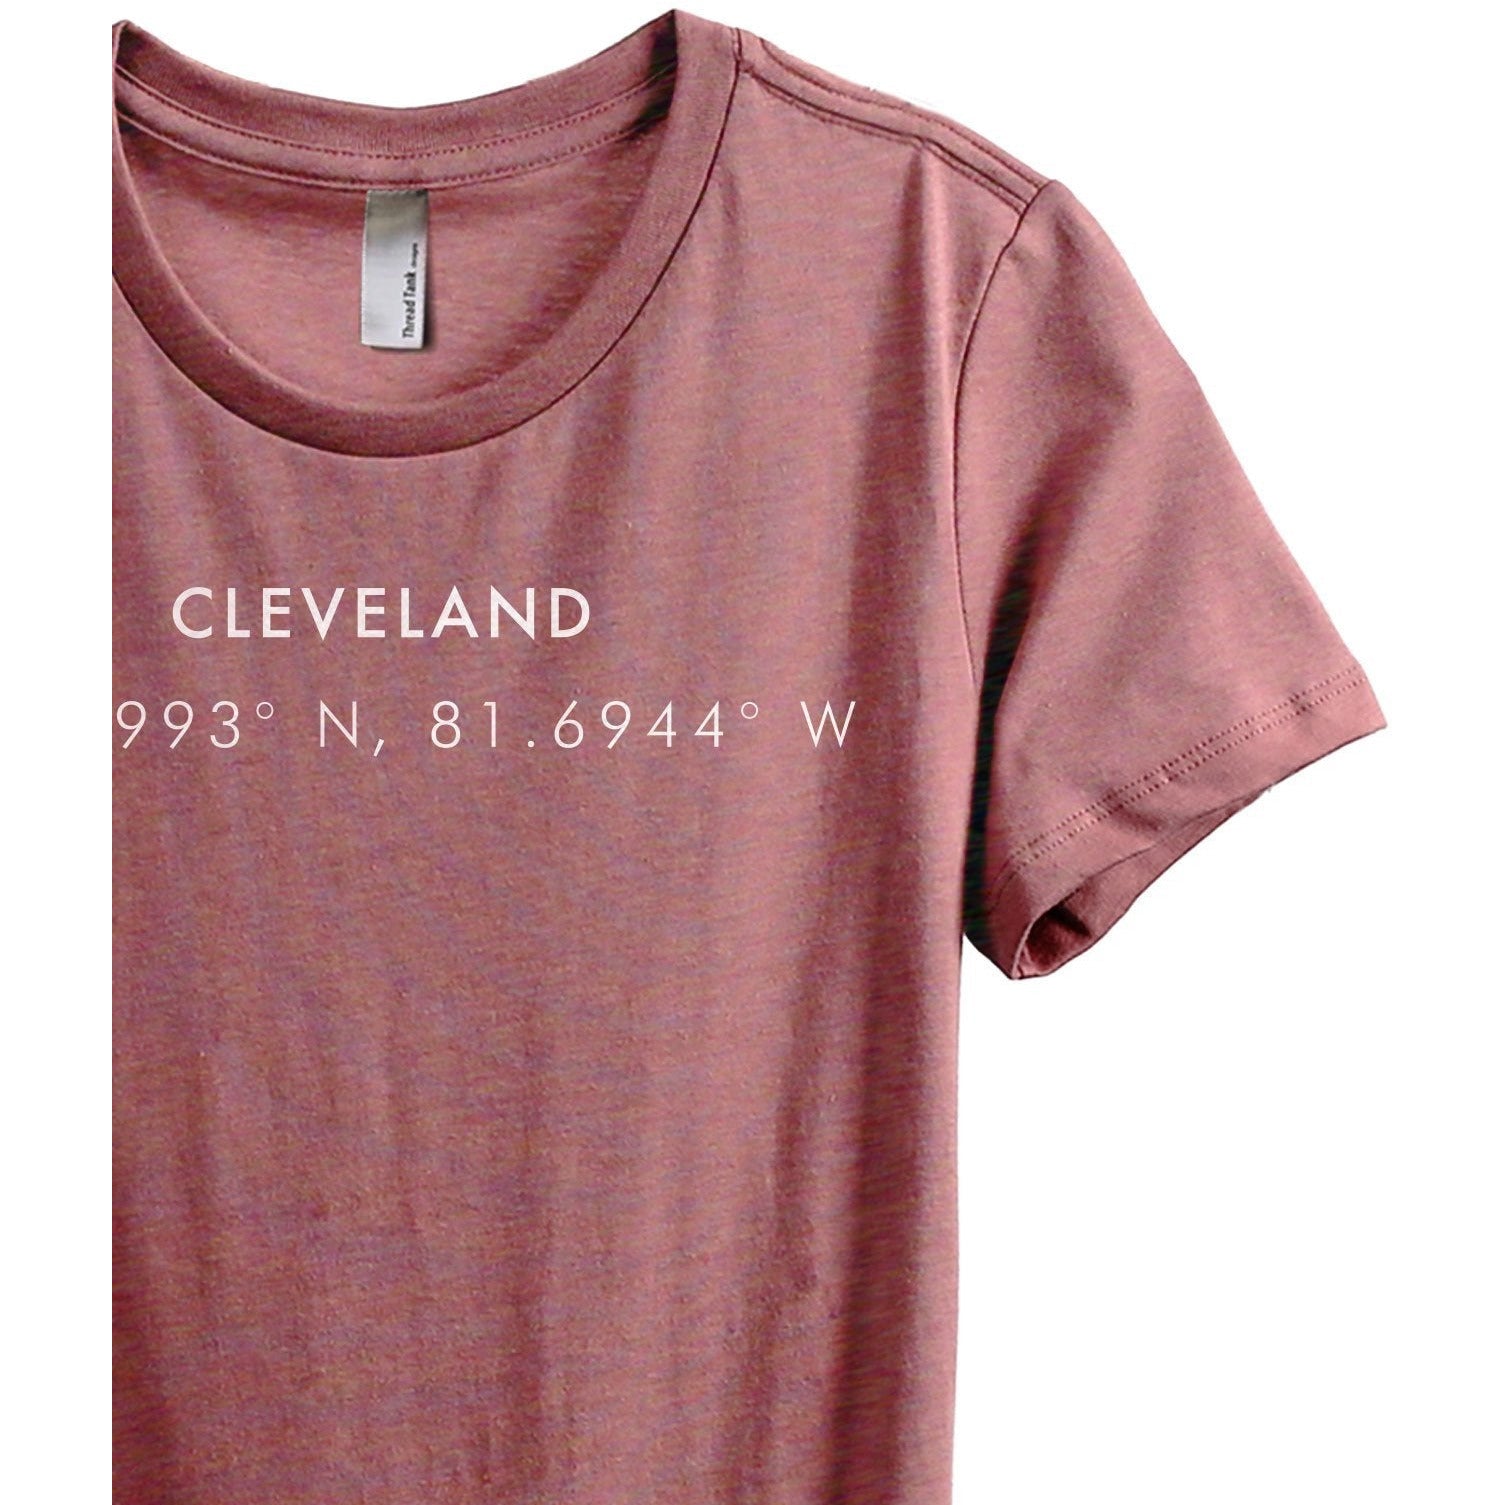 Cleveland Ohio Coordinates Women's Relaxed Crewneck T-Shirt Top Tee Heather Rouge Zoom Details
